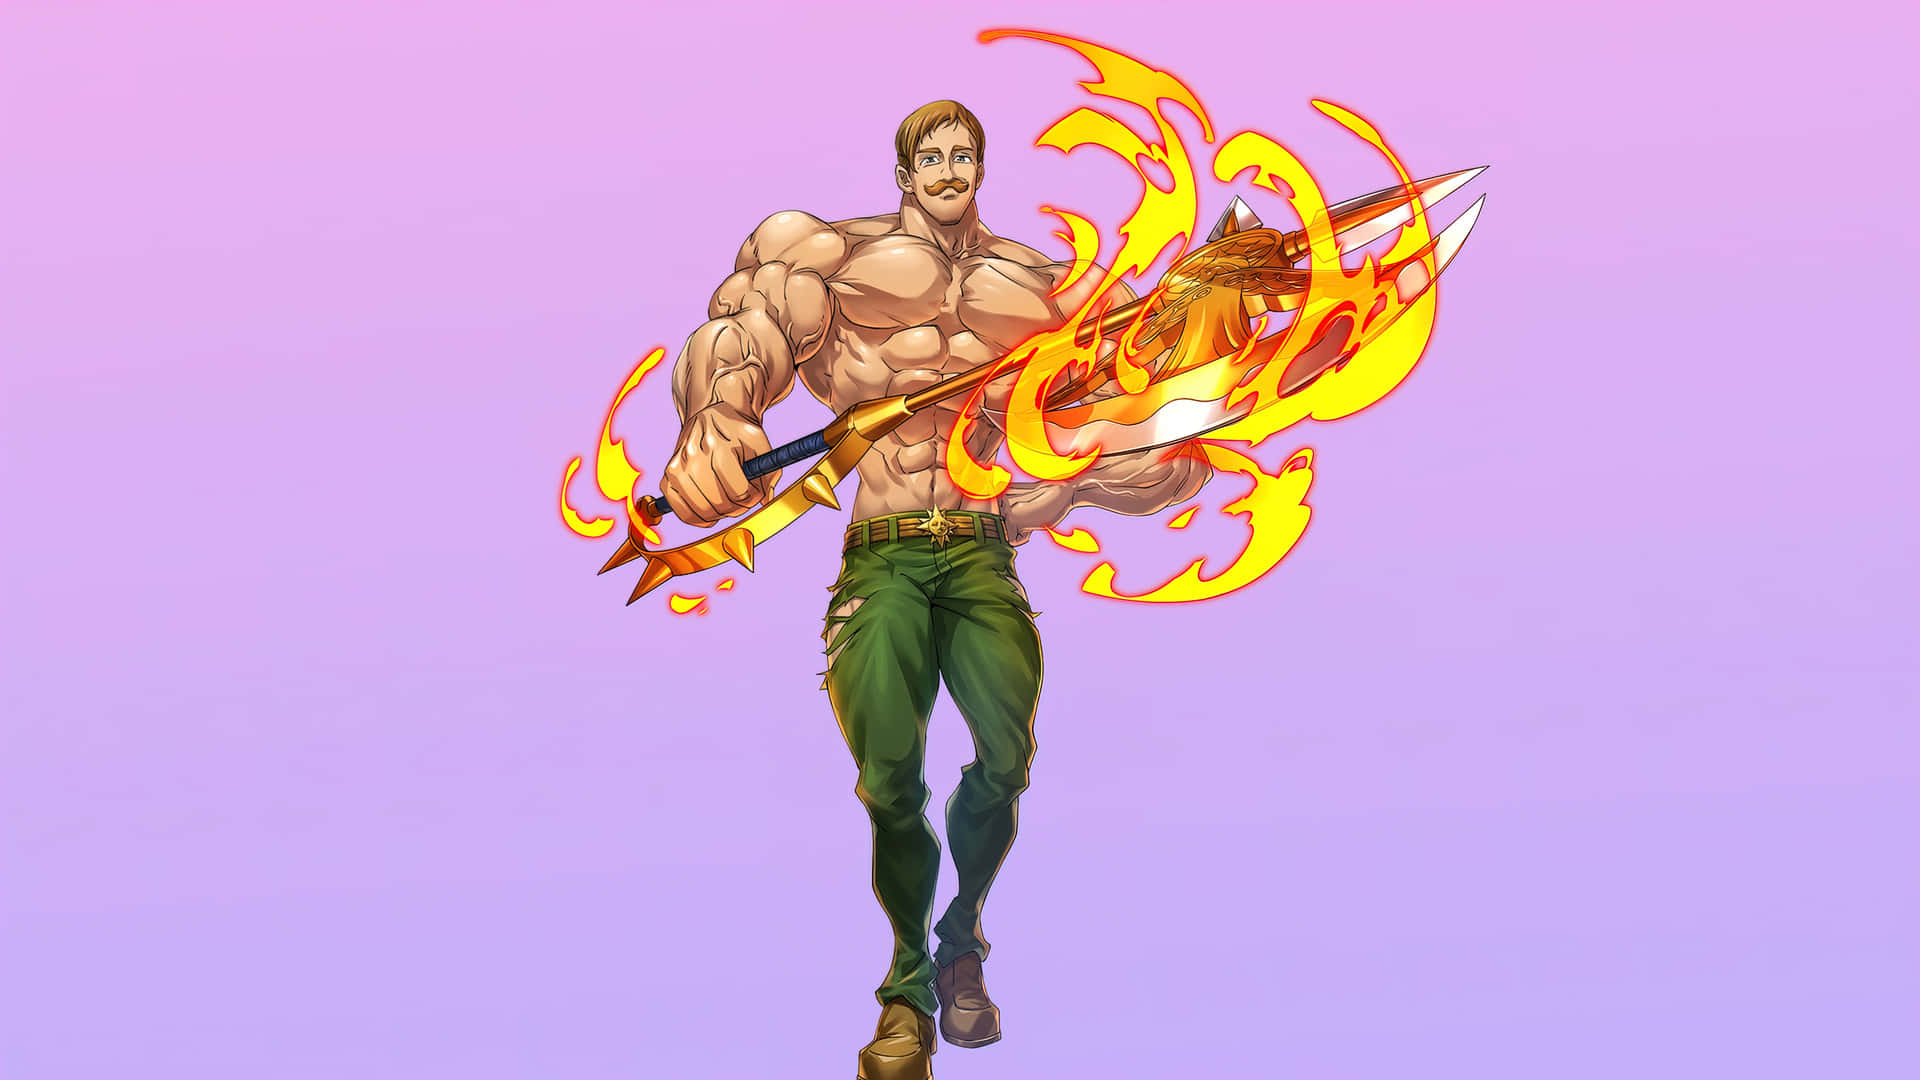 The Brave Escanor of The Seven Deadly Sins